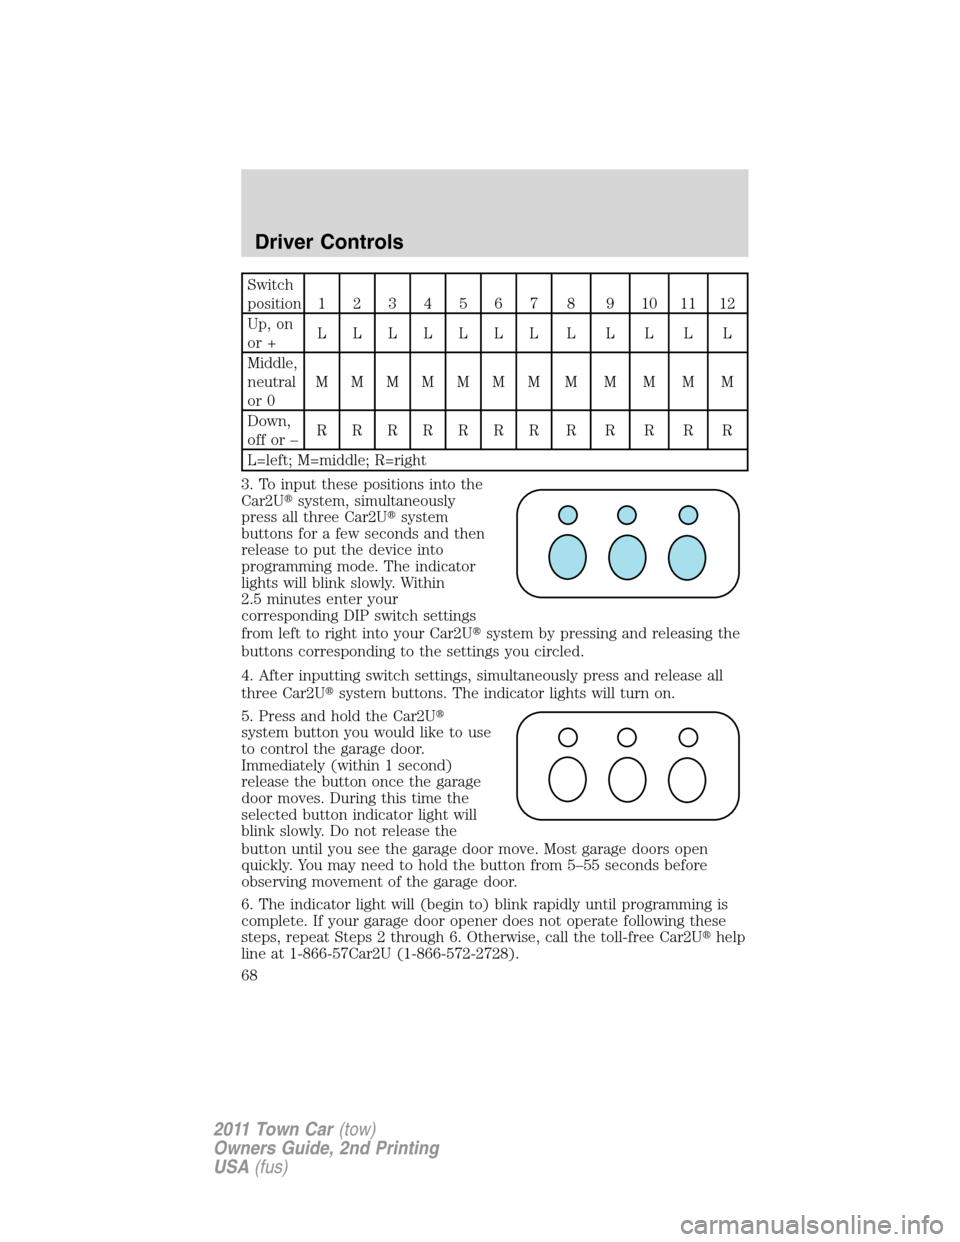 LINCOLN TOWN CAR 2011 Repair Manual Switch
position1234567 8 9101112
Up, on
or +LLLLLLLLLLLL
Middle,
neutral
or 0MMMMMMMMMMMM
Down,
offor–RRRRRRRRRRRR
L=left; M=middle; R=right
3. To input these positions into the
Car2Usystem, simult